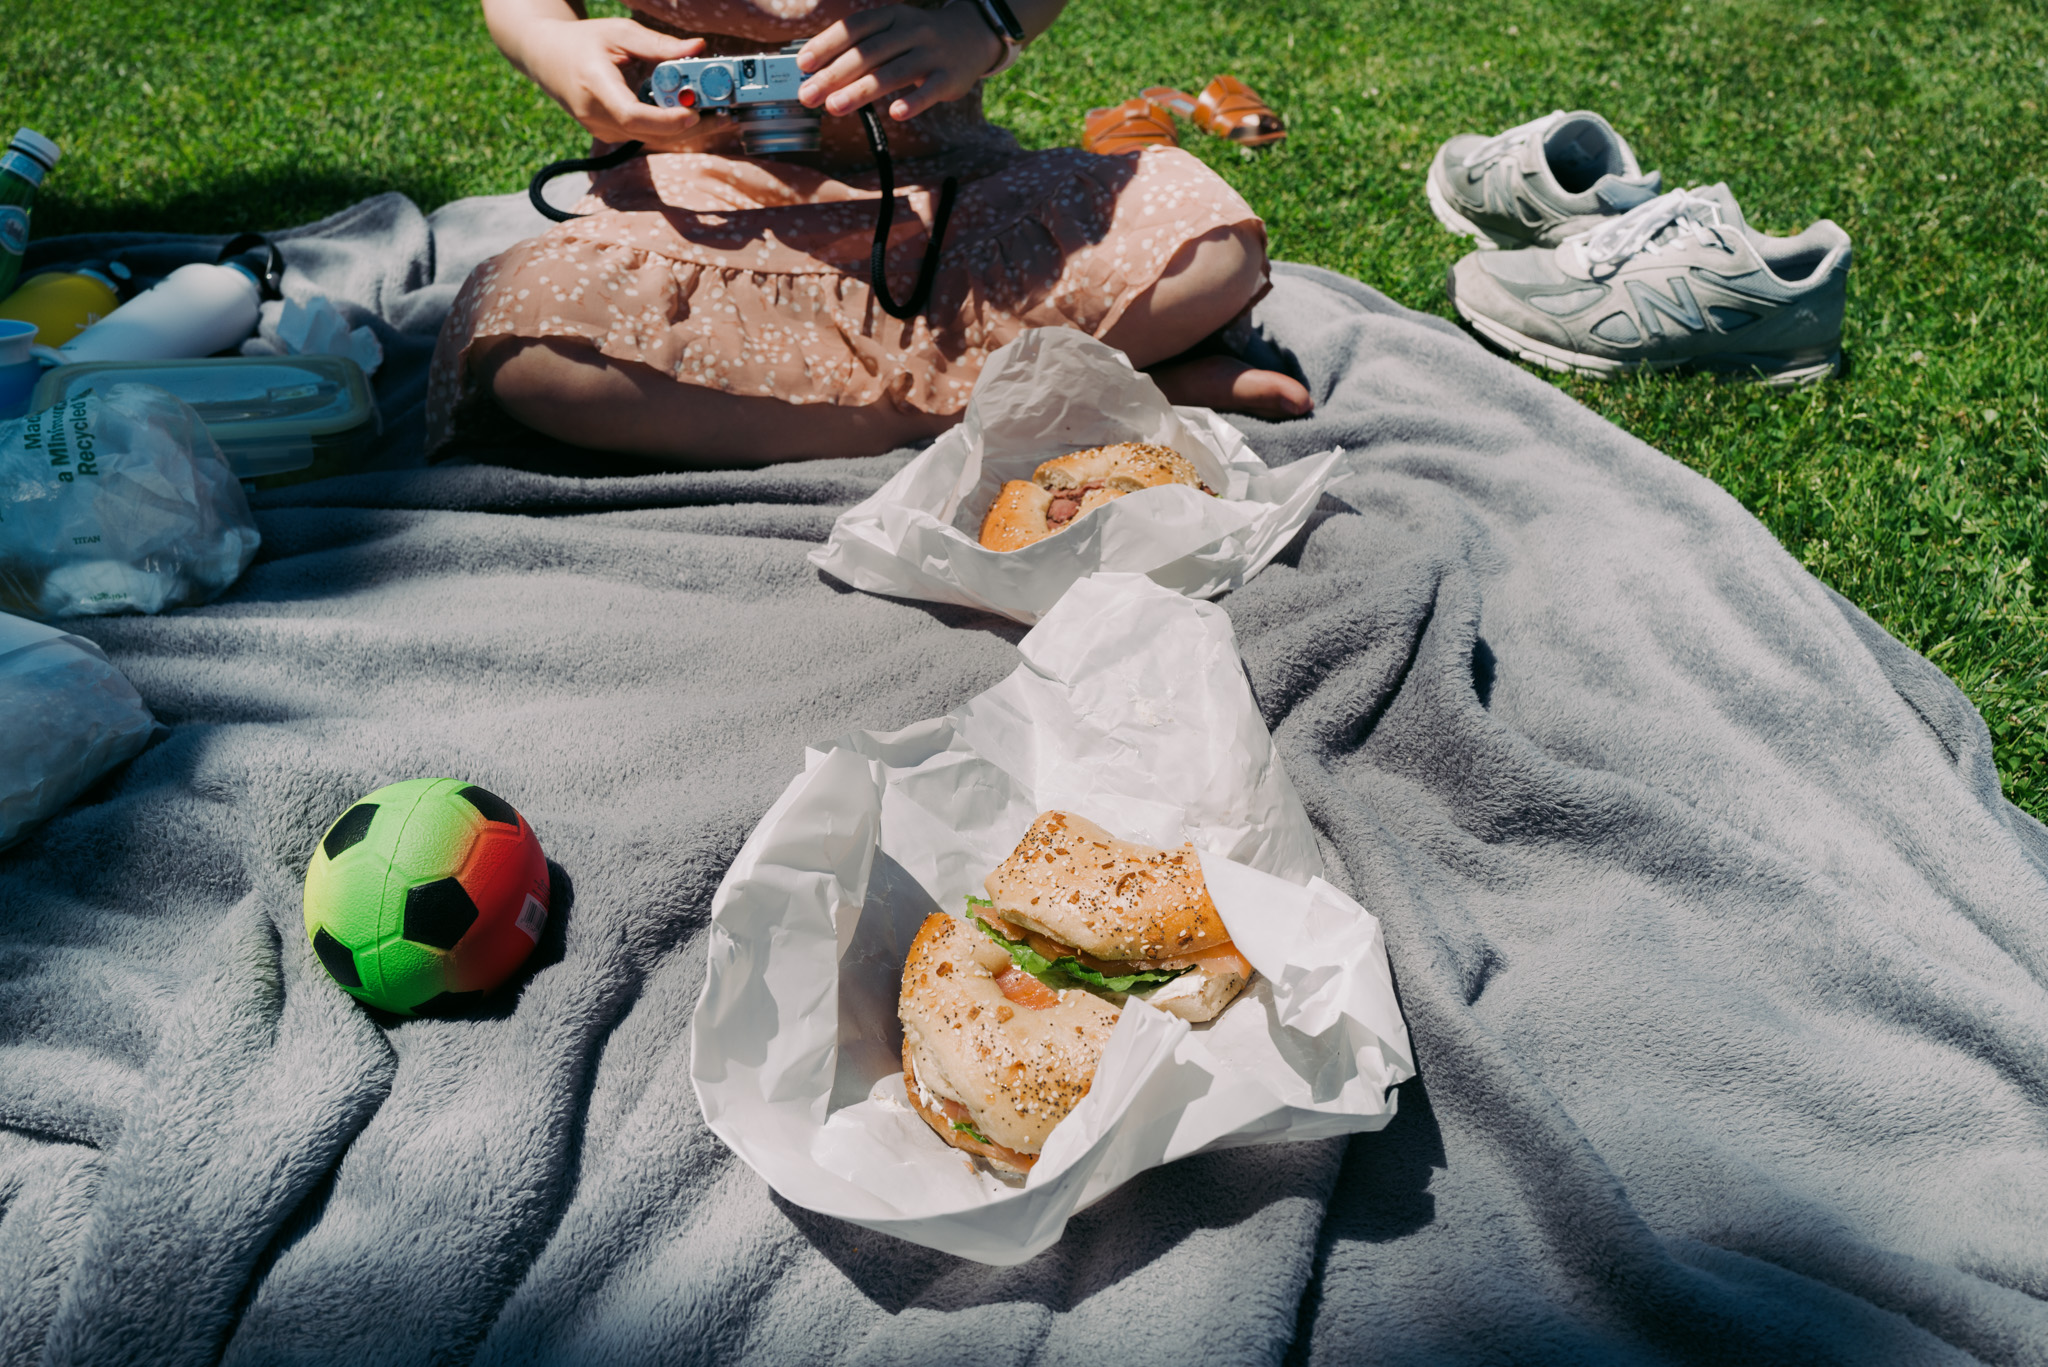 A picnic with bagels from Bagel World.